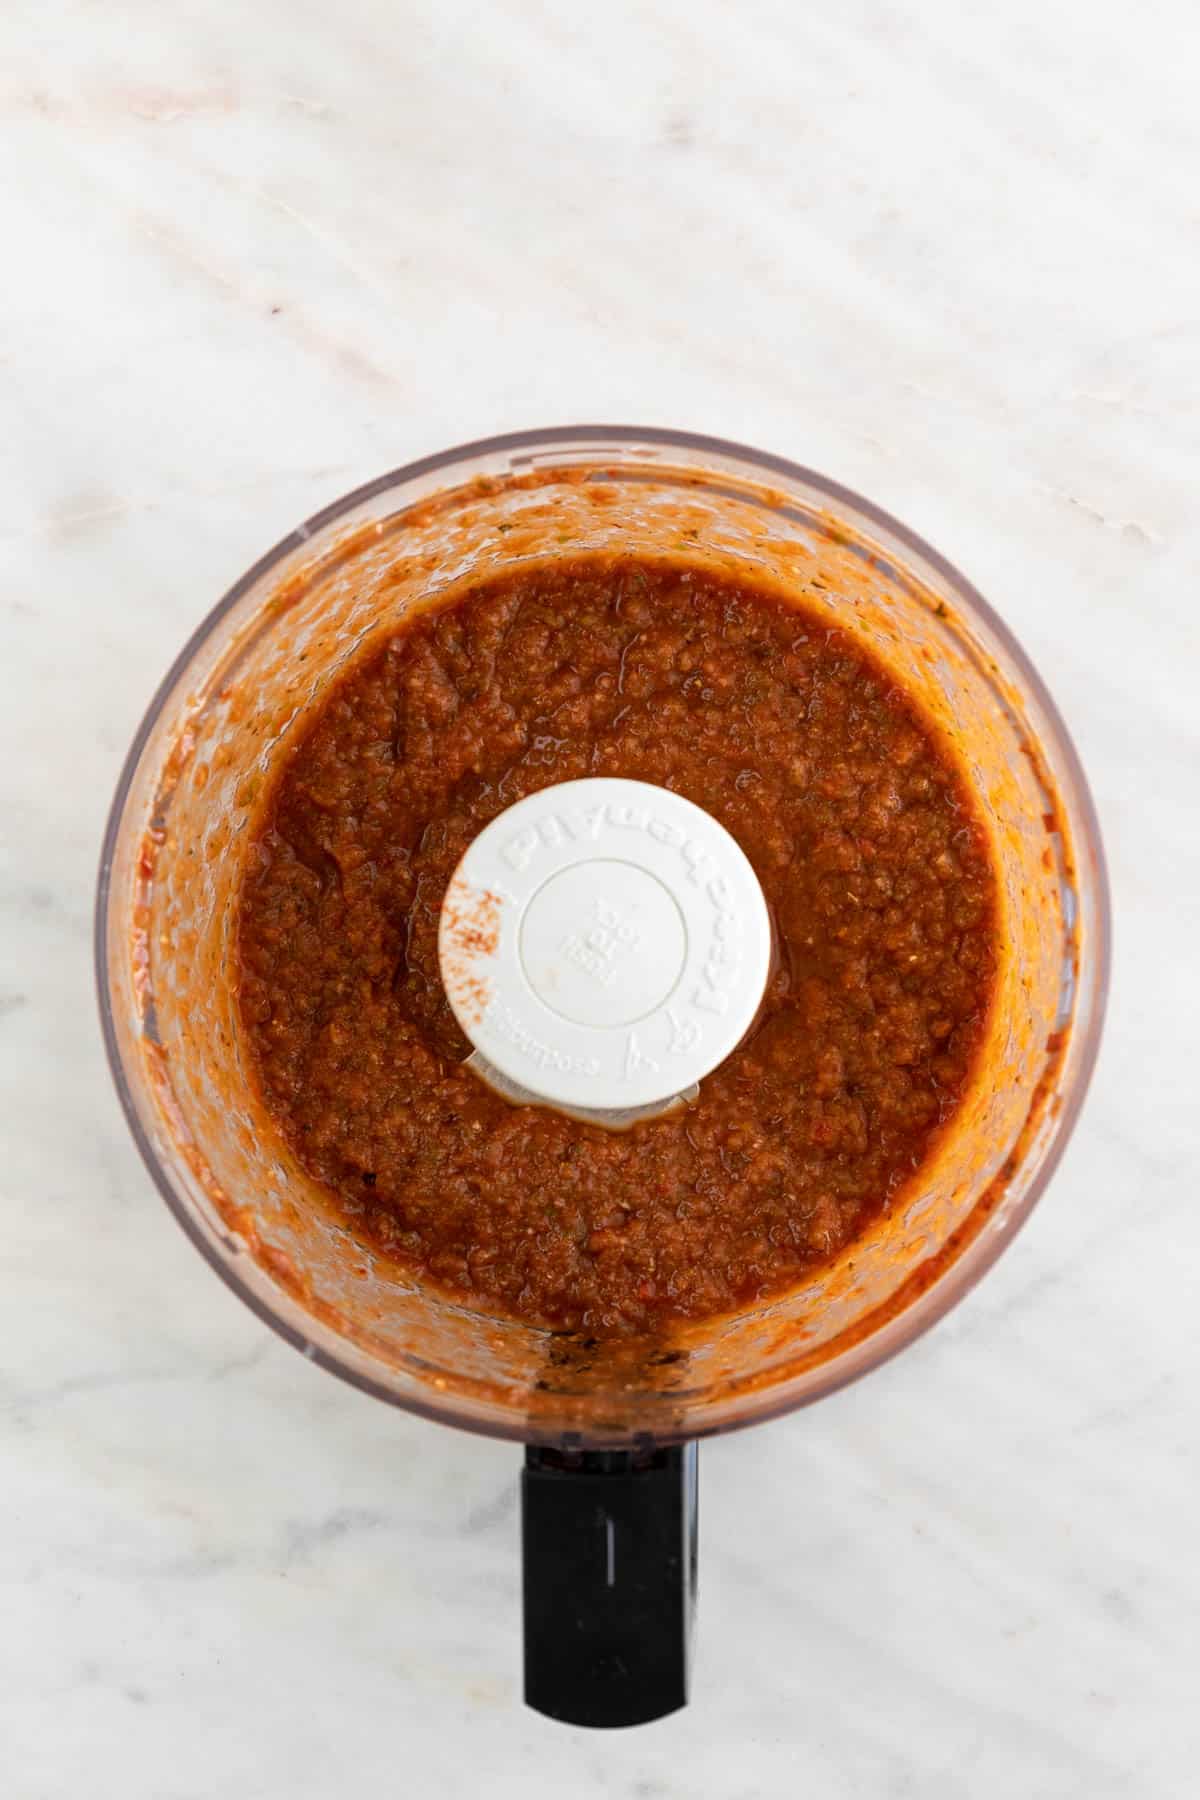 Chipotle sofritas sauce in a food processor.